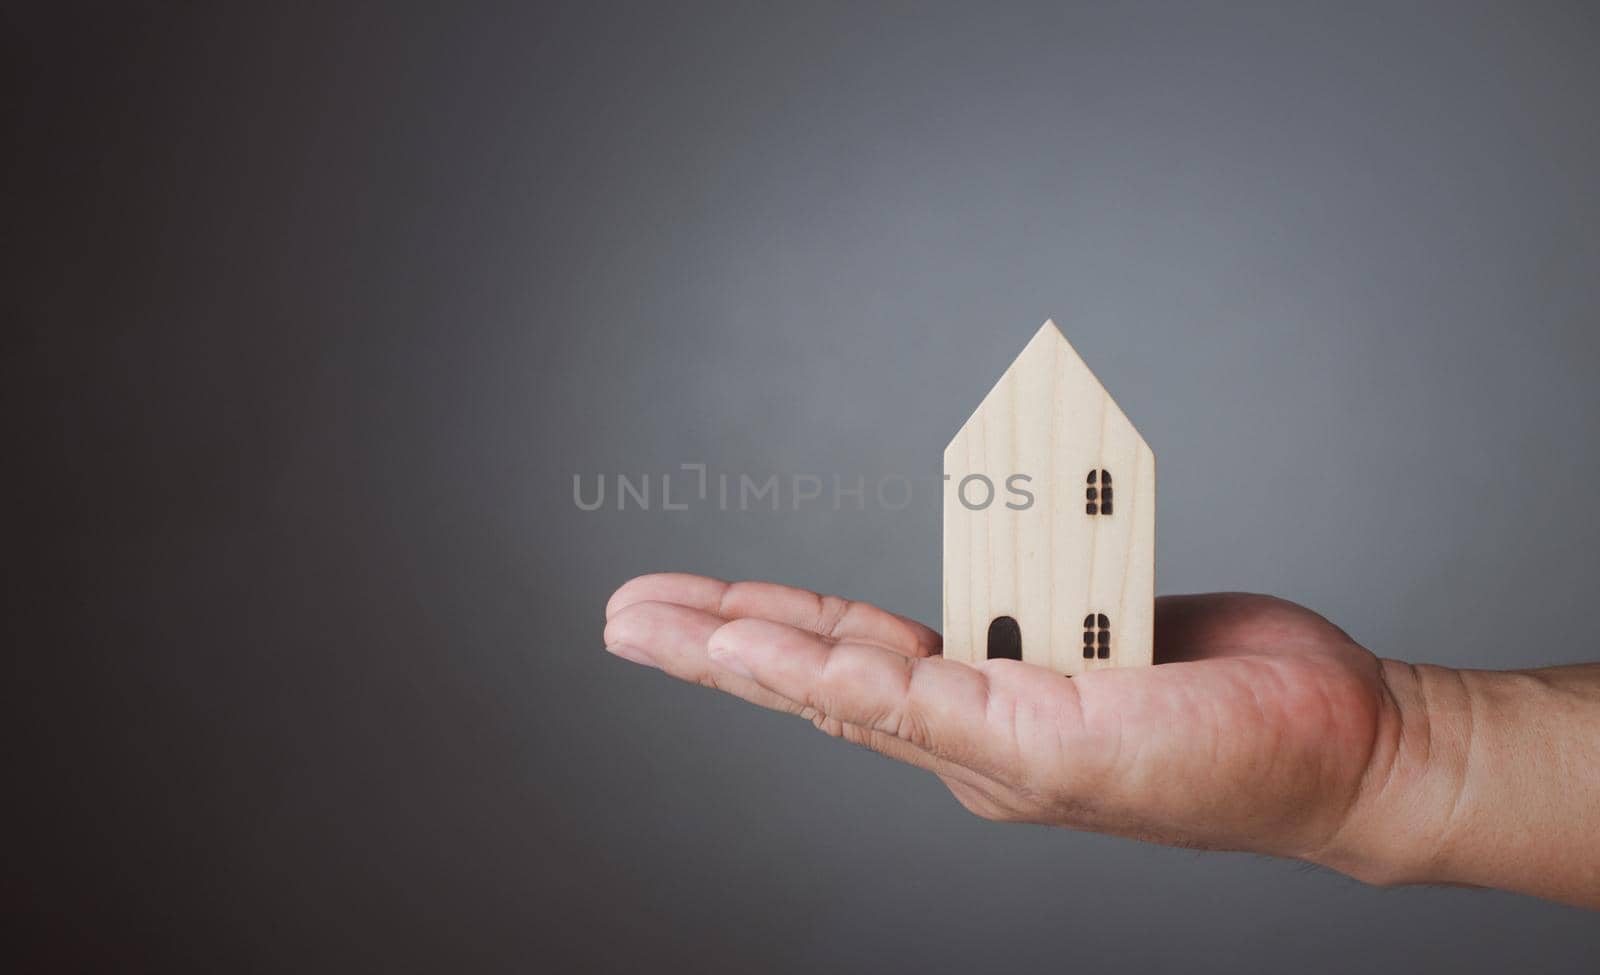 Concept of selling a house. A hand is holding a model house on a gray background. Real estate agent offer house, property insurance and security, affordable housing concepts, home insurance broker agent, salesman person.